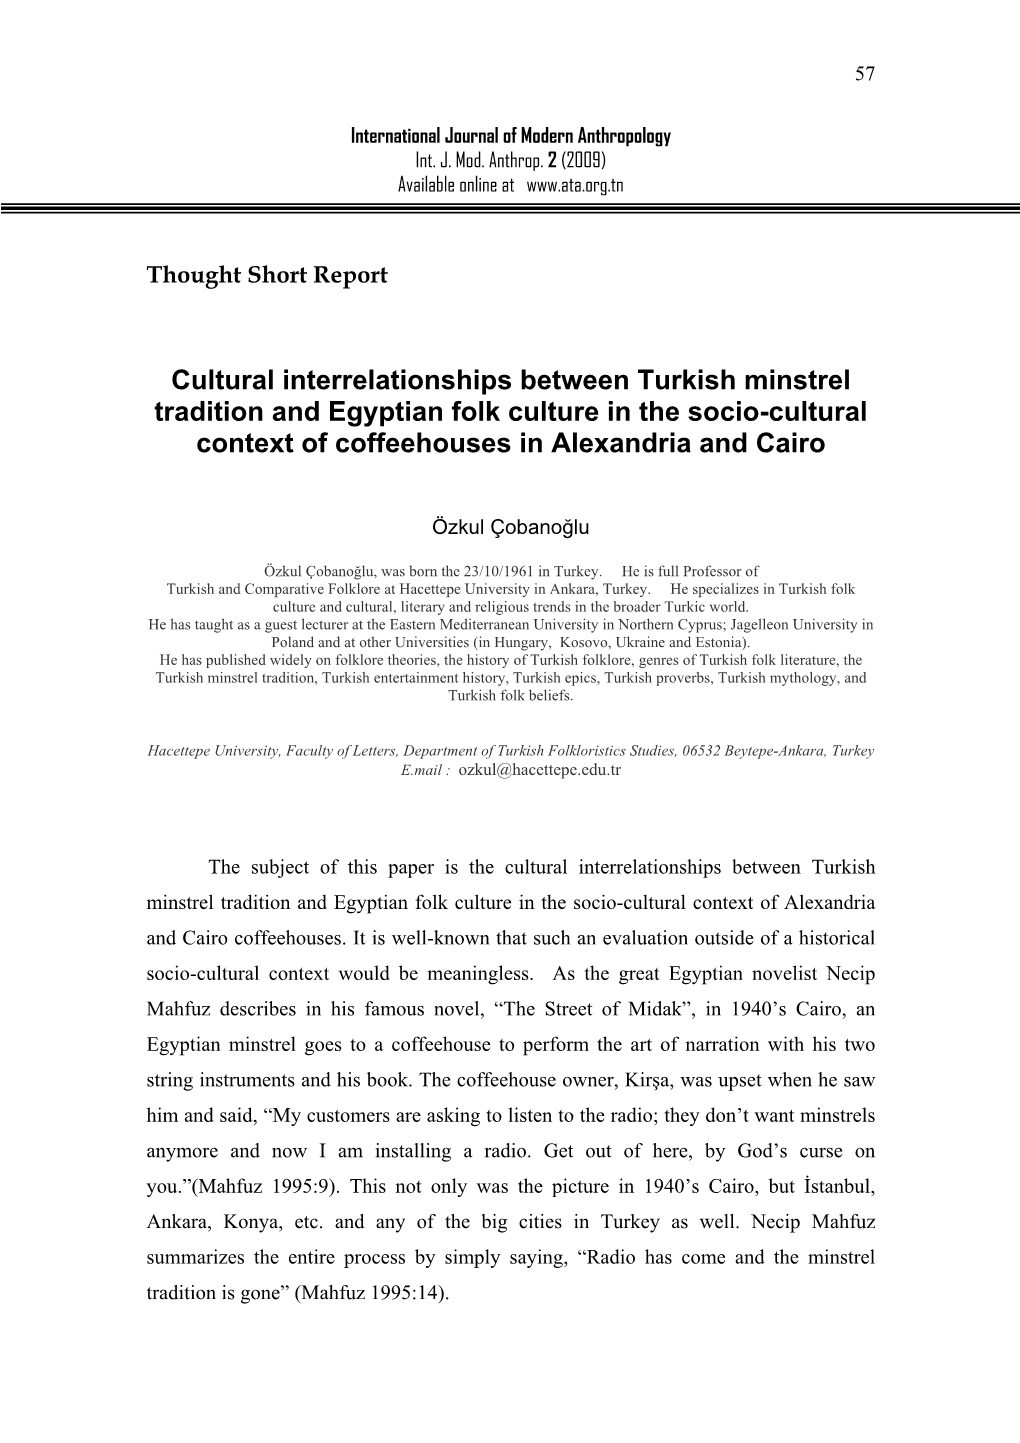 Cultural Interrelationships Between Turkish Minstrel Tradition and Egyptian Folk Culture in the Socio-Cultural Context of Coffeehouses in Alexandria and Cairo